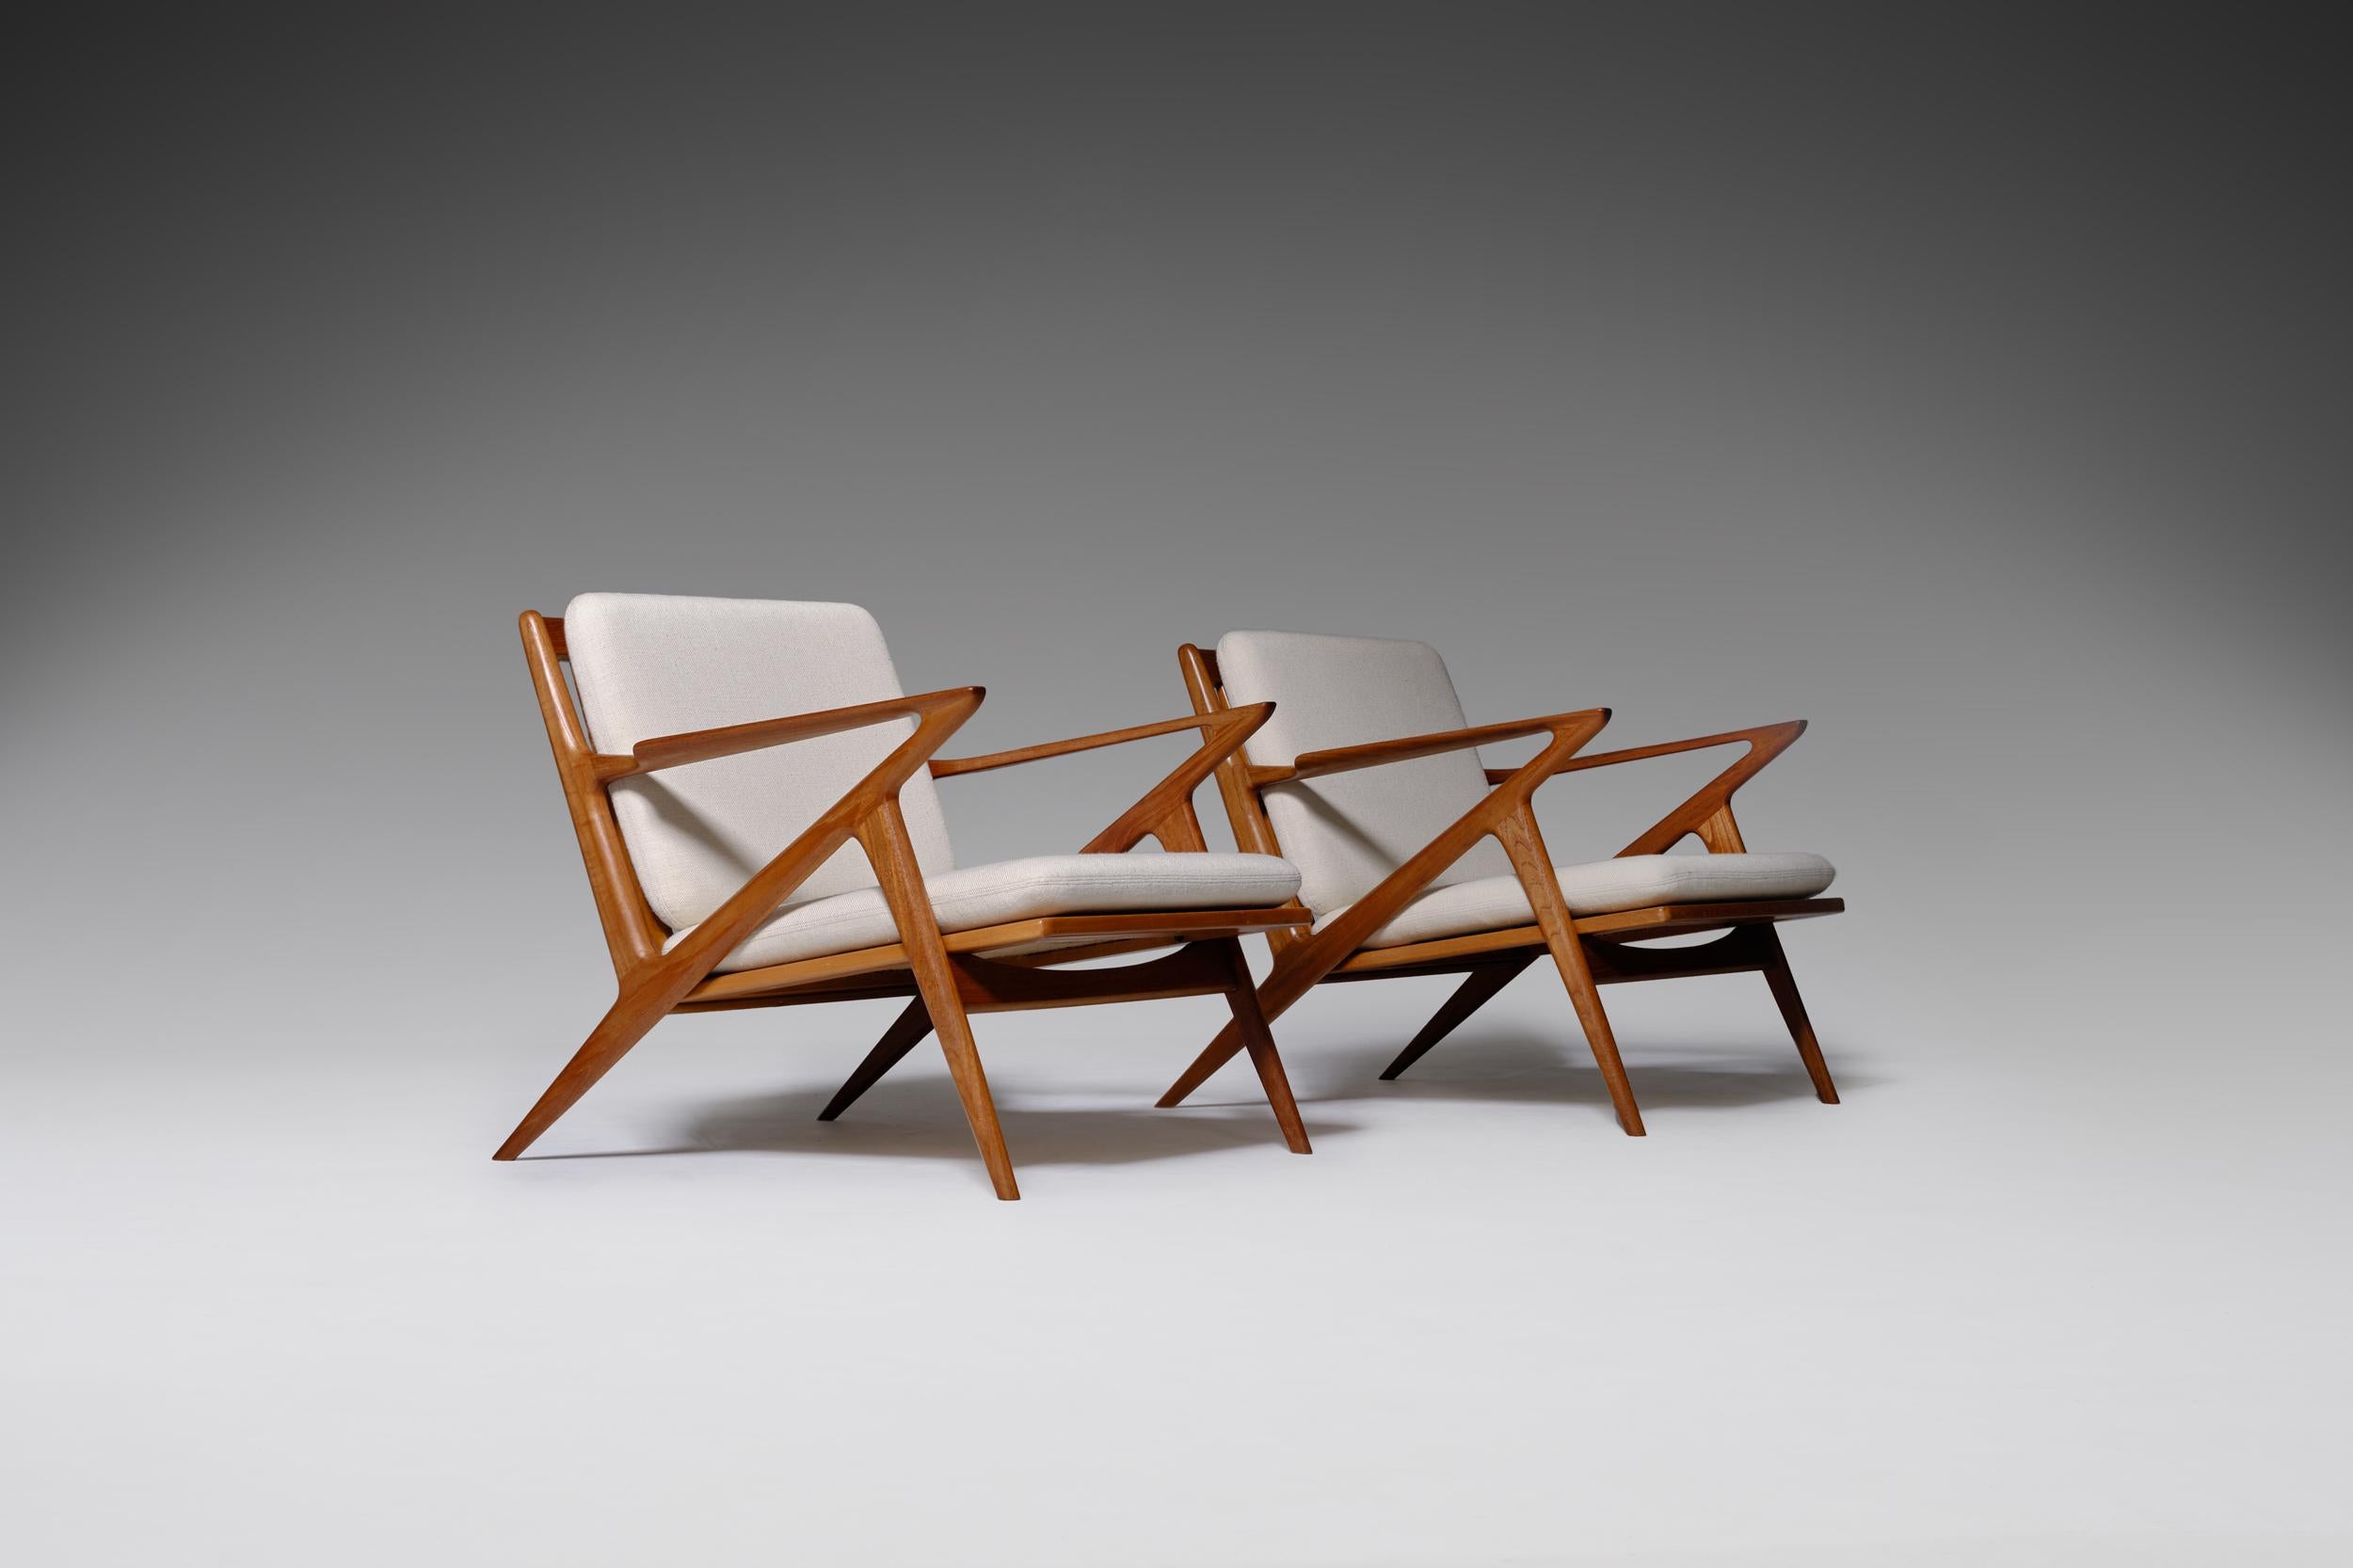 Mid-Century Modern lounge chairs by Poul Jensen for Selig, Denmark, 1960s. Stunning sculptural shaped frames out of warm colored solid teak with remarkable sharp lines that resembles the letter ‘Z'. Lots of beautiful details such as the elegant